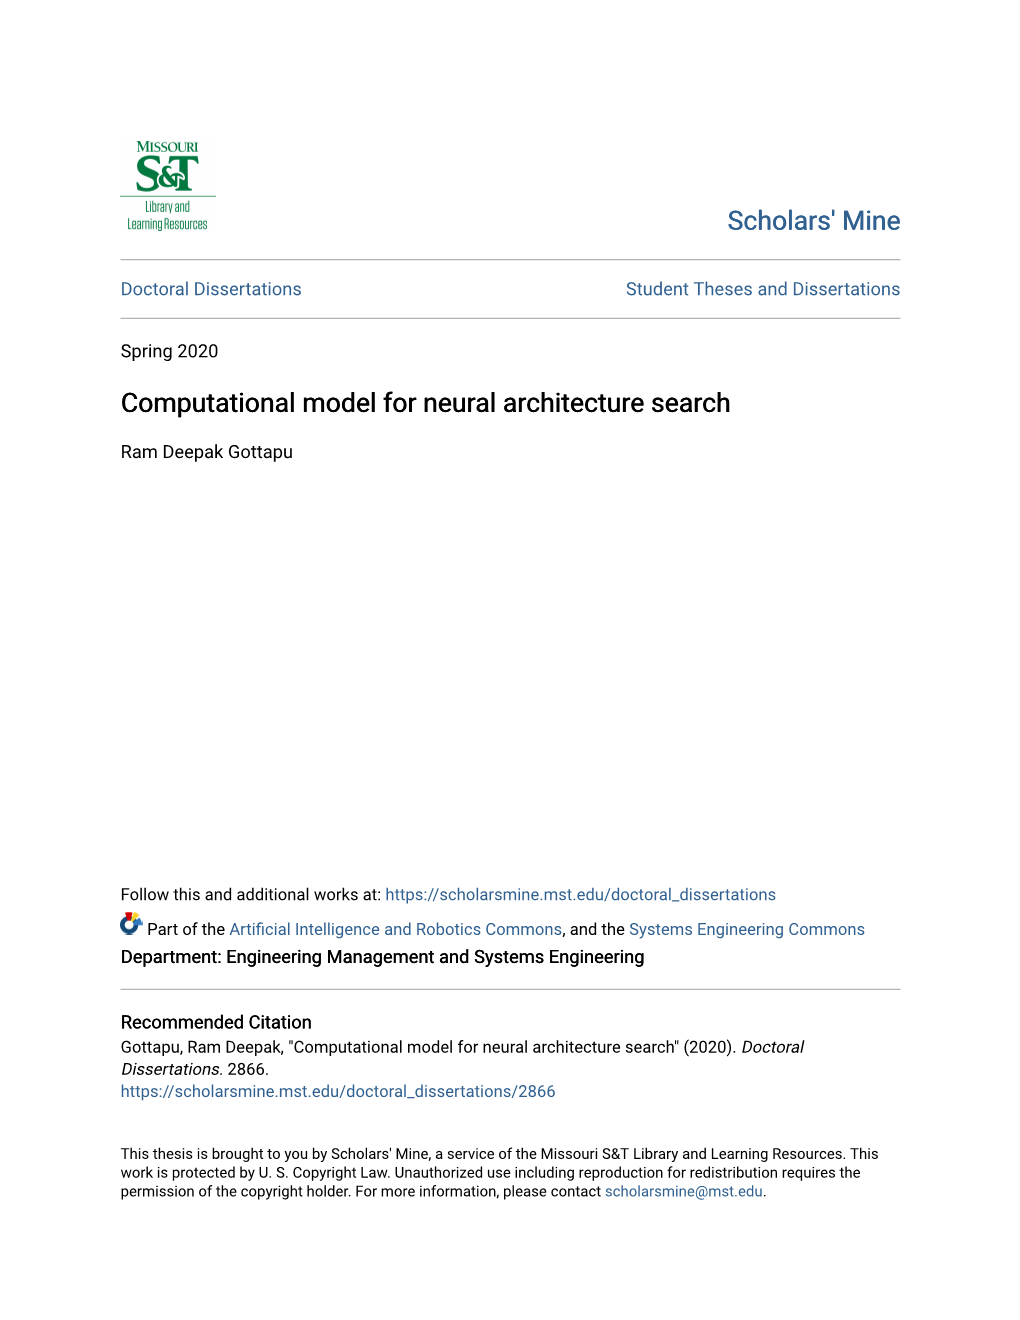 Computational Model for Neural Architecture Search